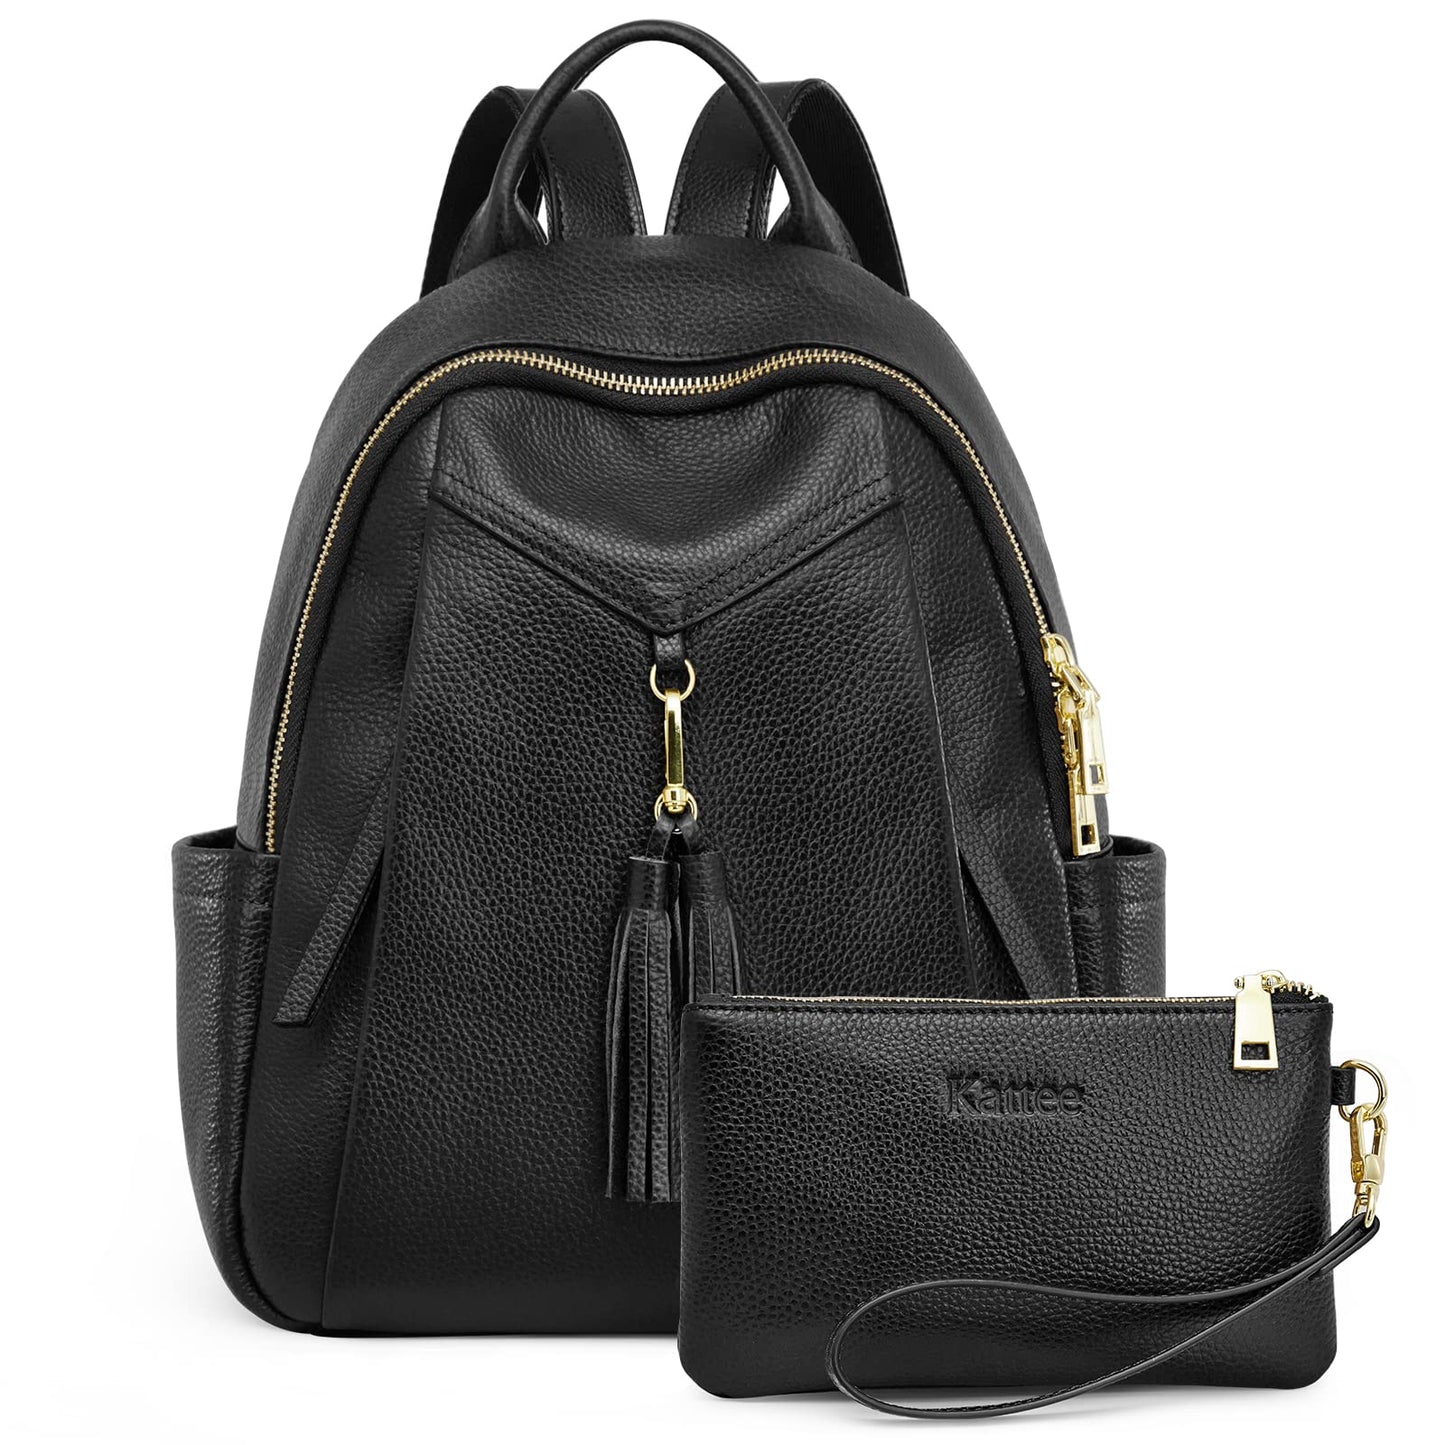 Women Leather Backpack with Wristlet Wallet